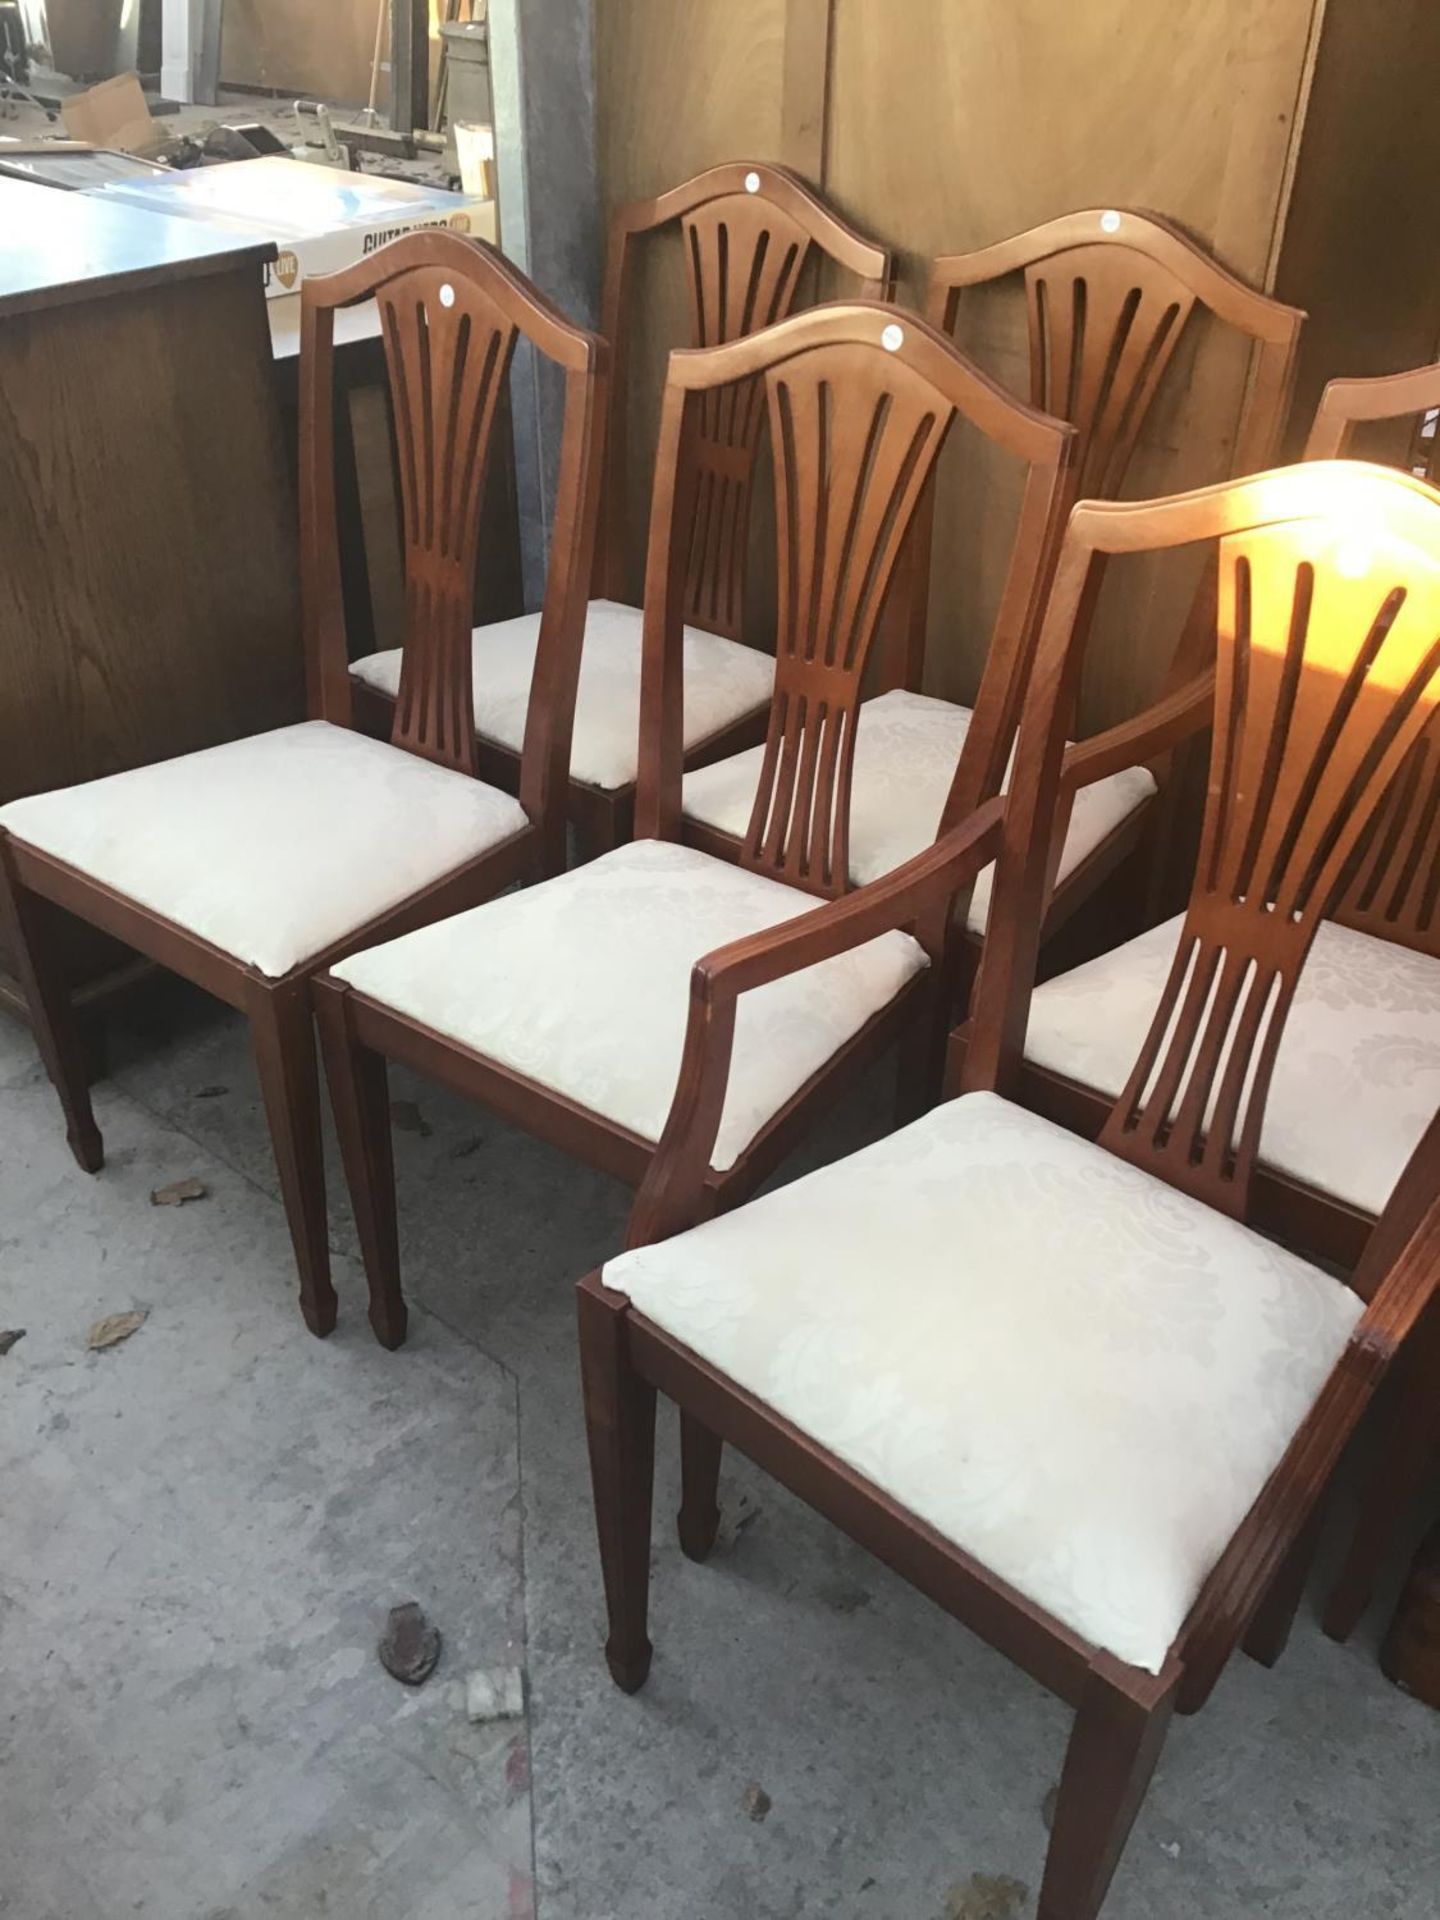 SIX CHERRY CHAIRS TO INCLUDE FOUR CHAIRS AND TWO CARVERS - Image 2 of 2